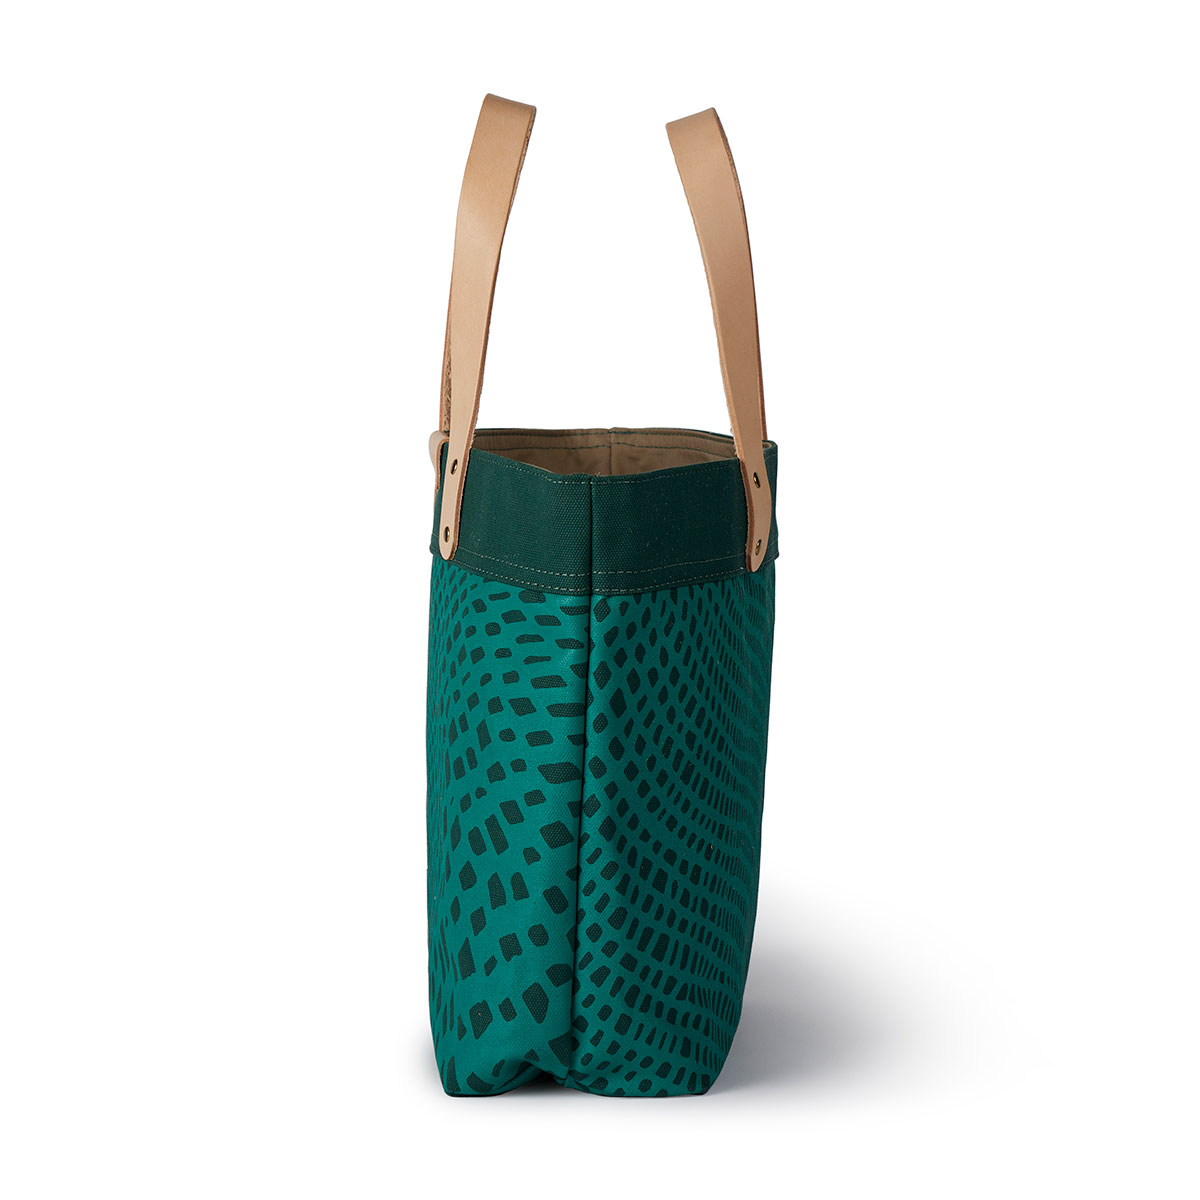 Side profile of Dark green and teal colored tote by Angela Adams